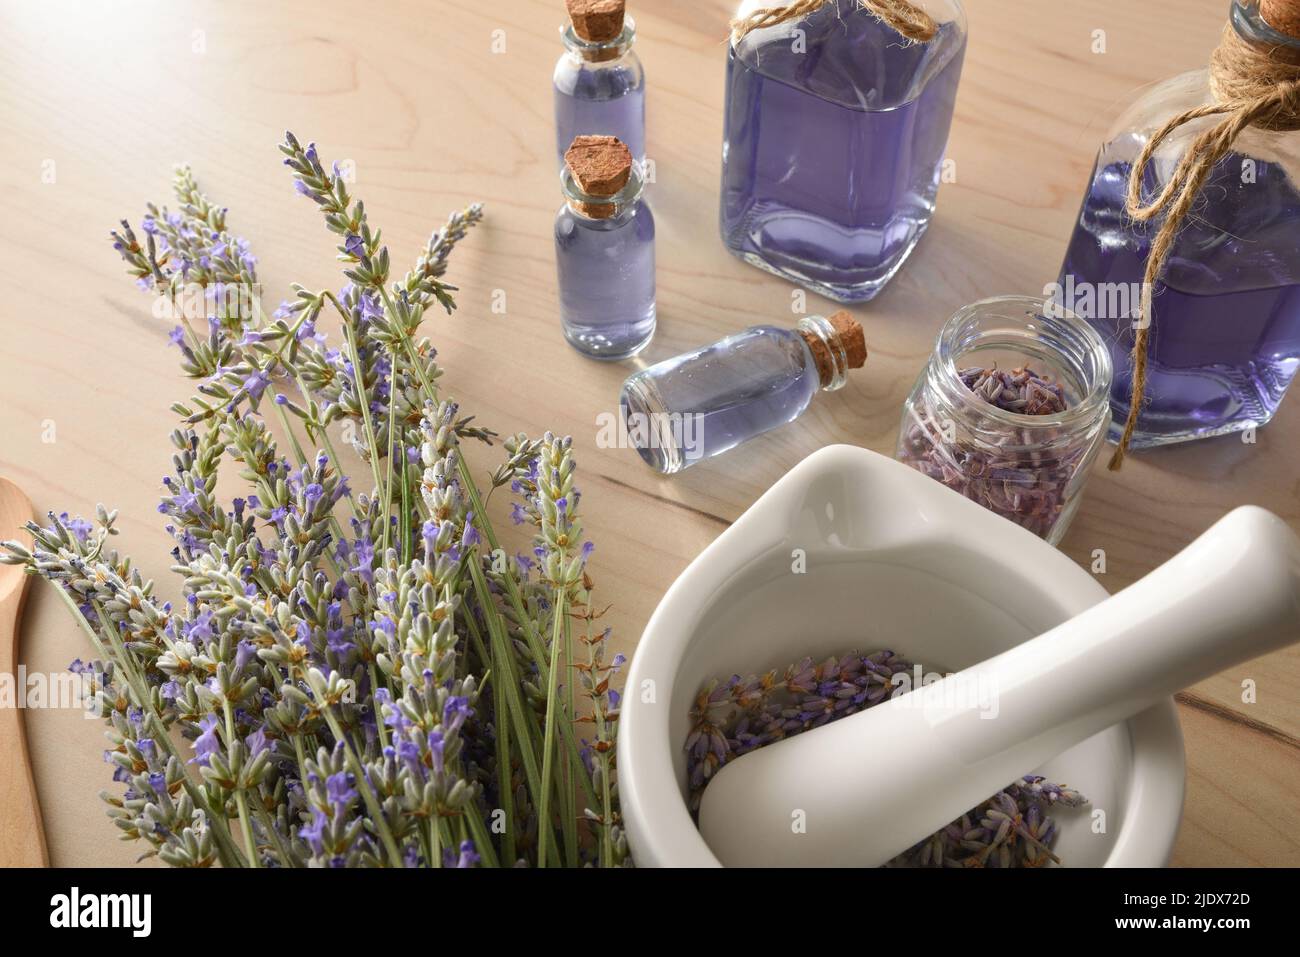 Homemade preparation of natural lavender essence with elements for the preparation and containers with lavender liquid close up. Elevated view. Horizo Stock Photo